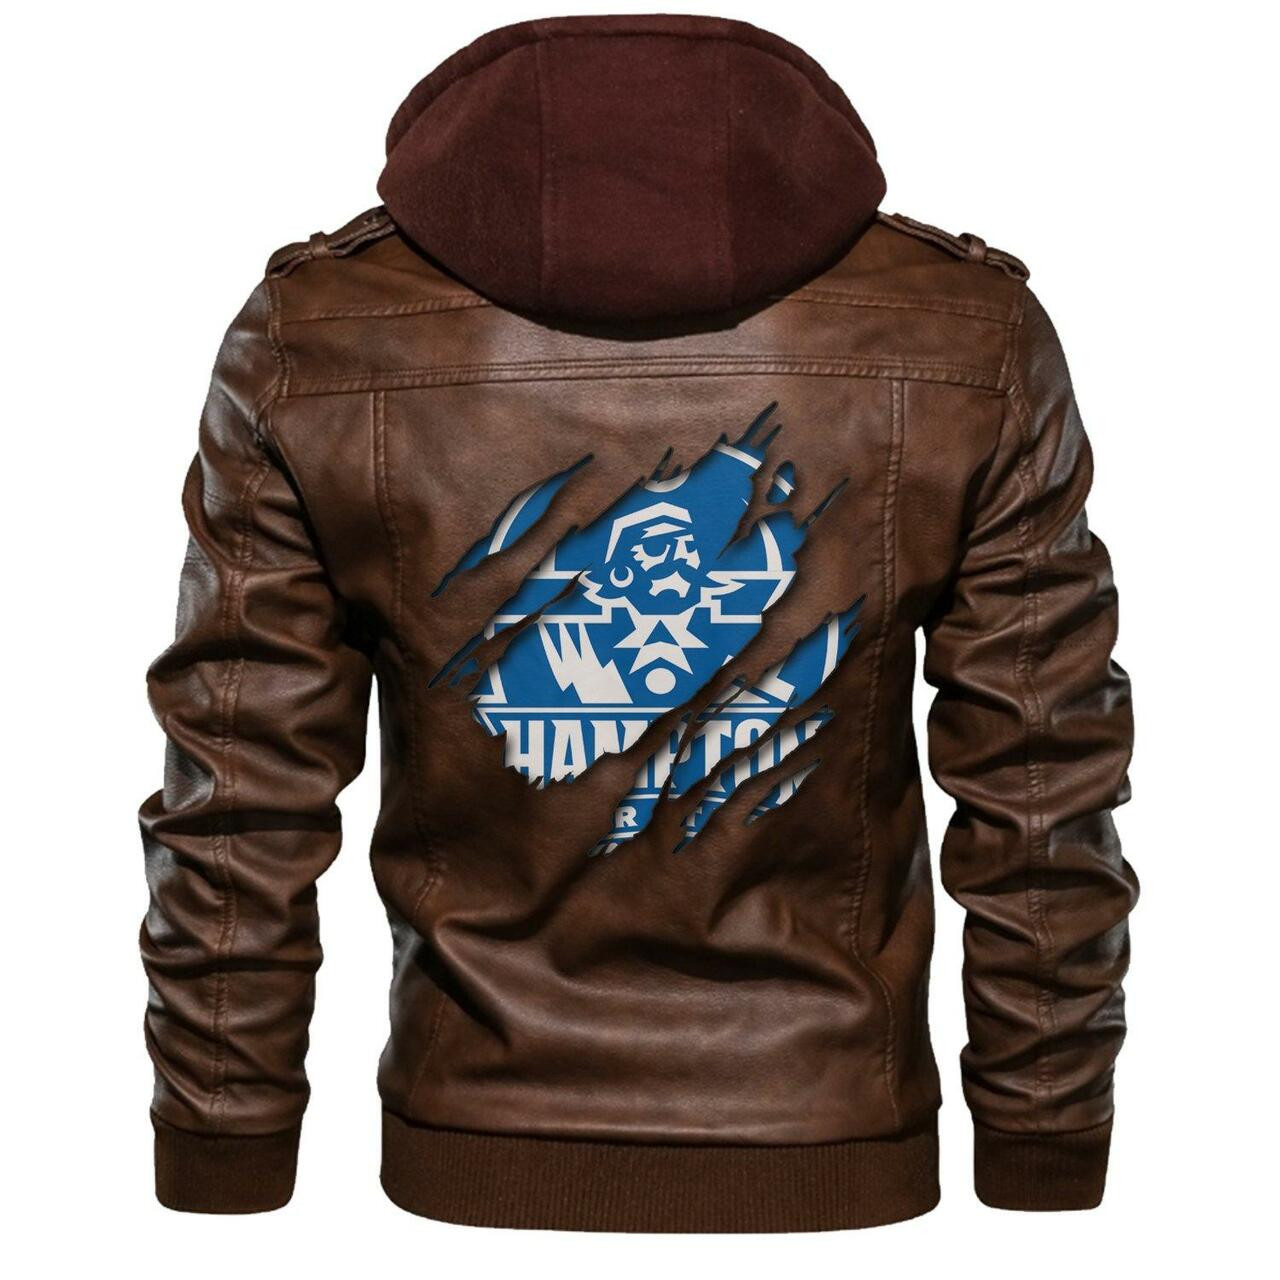 You can find a good leather jacket by access our website 61